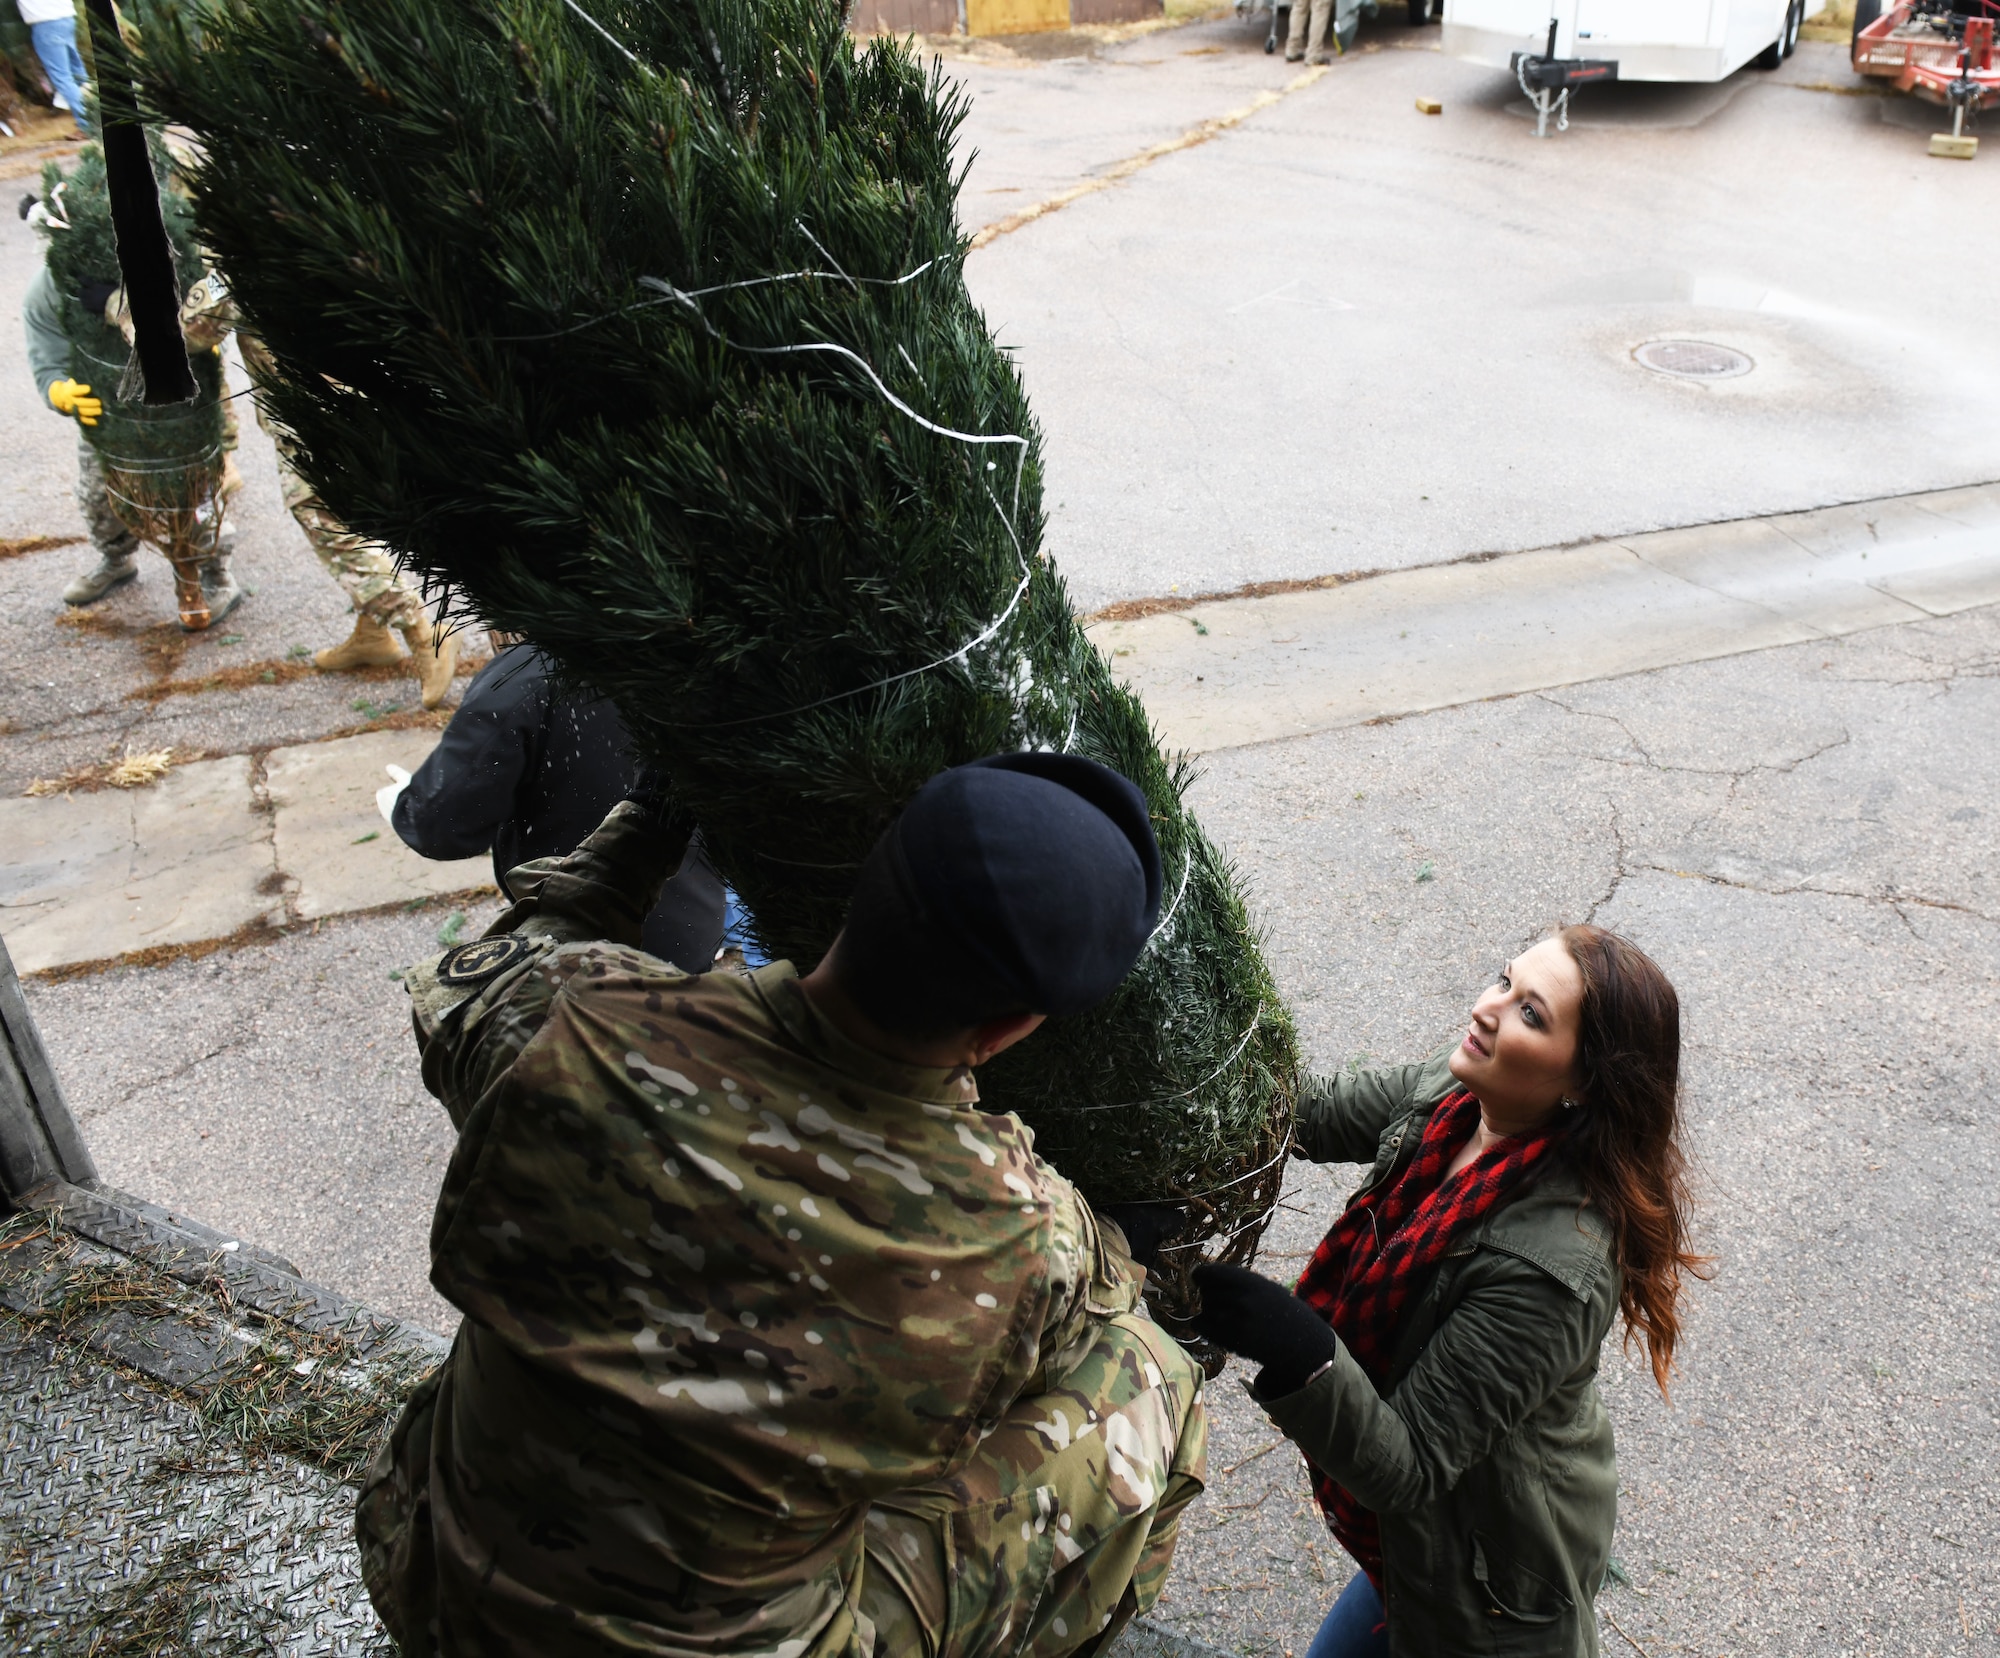 Chelsey Mastalski, the 28th Force Support Squadron outdoor recreation manager, unloads a tree from a truck at Ellsworth Air Force Base, S.D., Nov. 30, 2018. Trees for Troops is an event where community members all over the country donate trees to service members so they can have a free tree for the holidays. (U.S. Air Force photo by Airman 1st Class Thomas Karol)